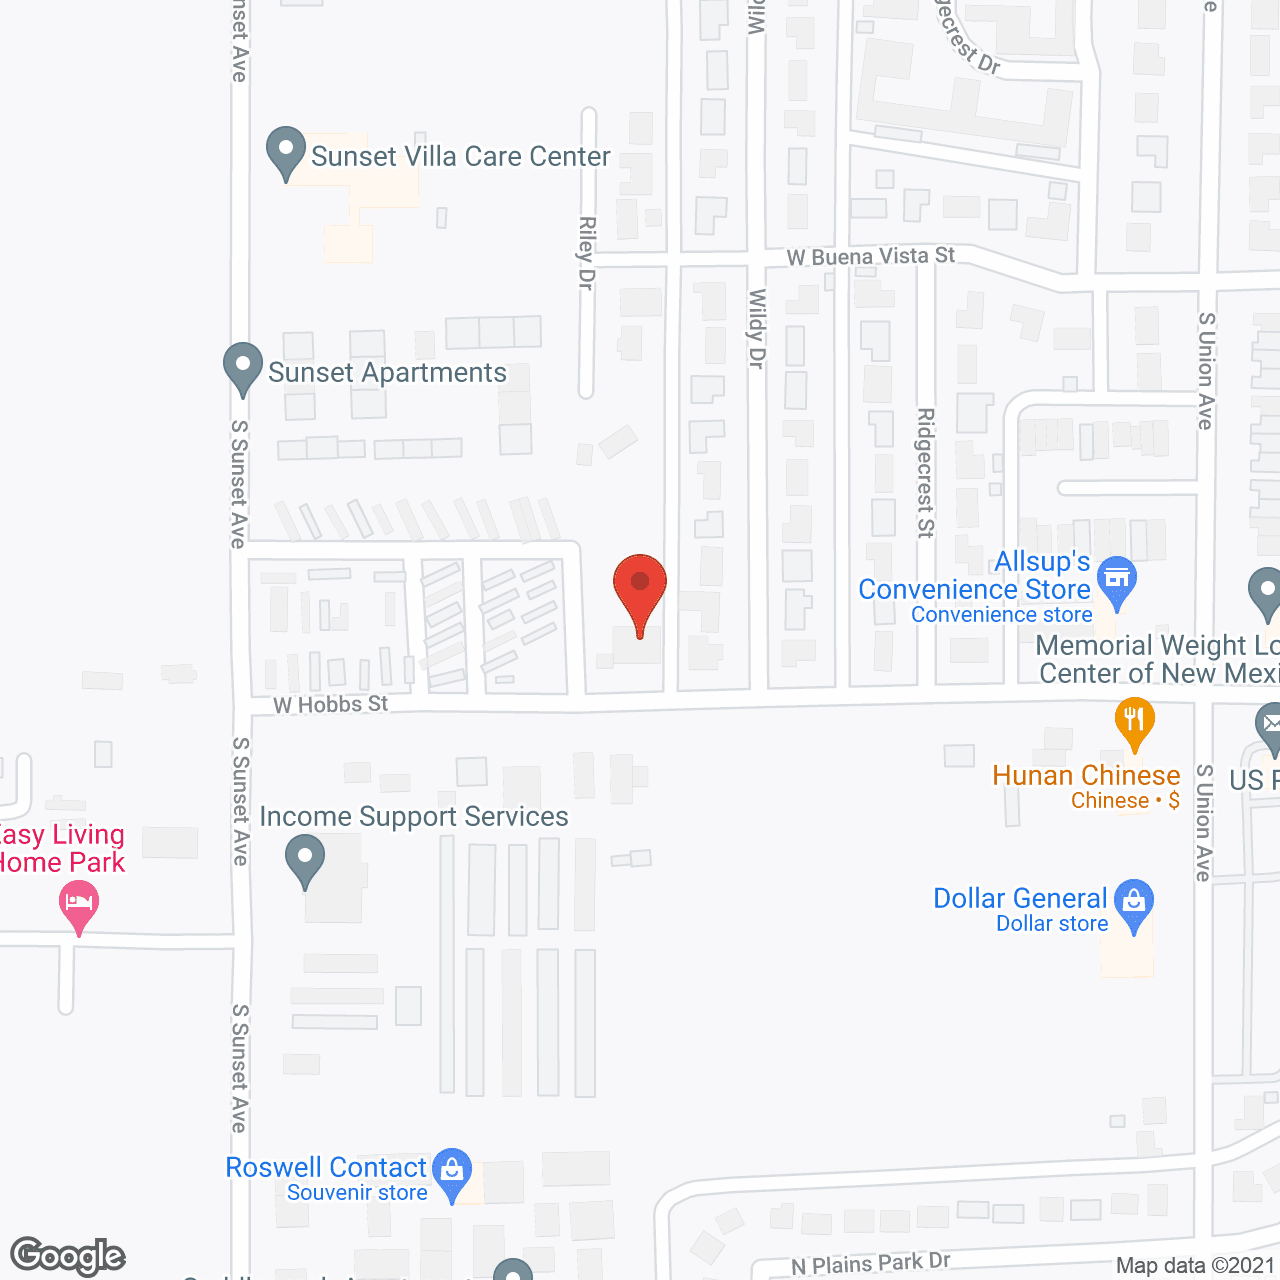 Share-A-Home in google map